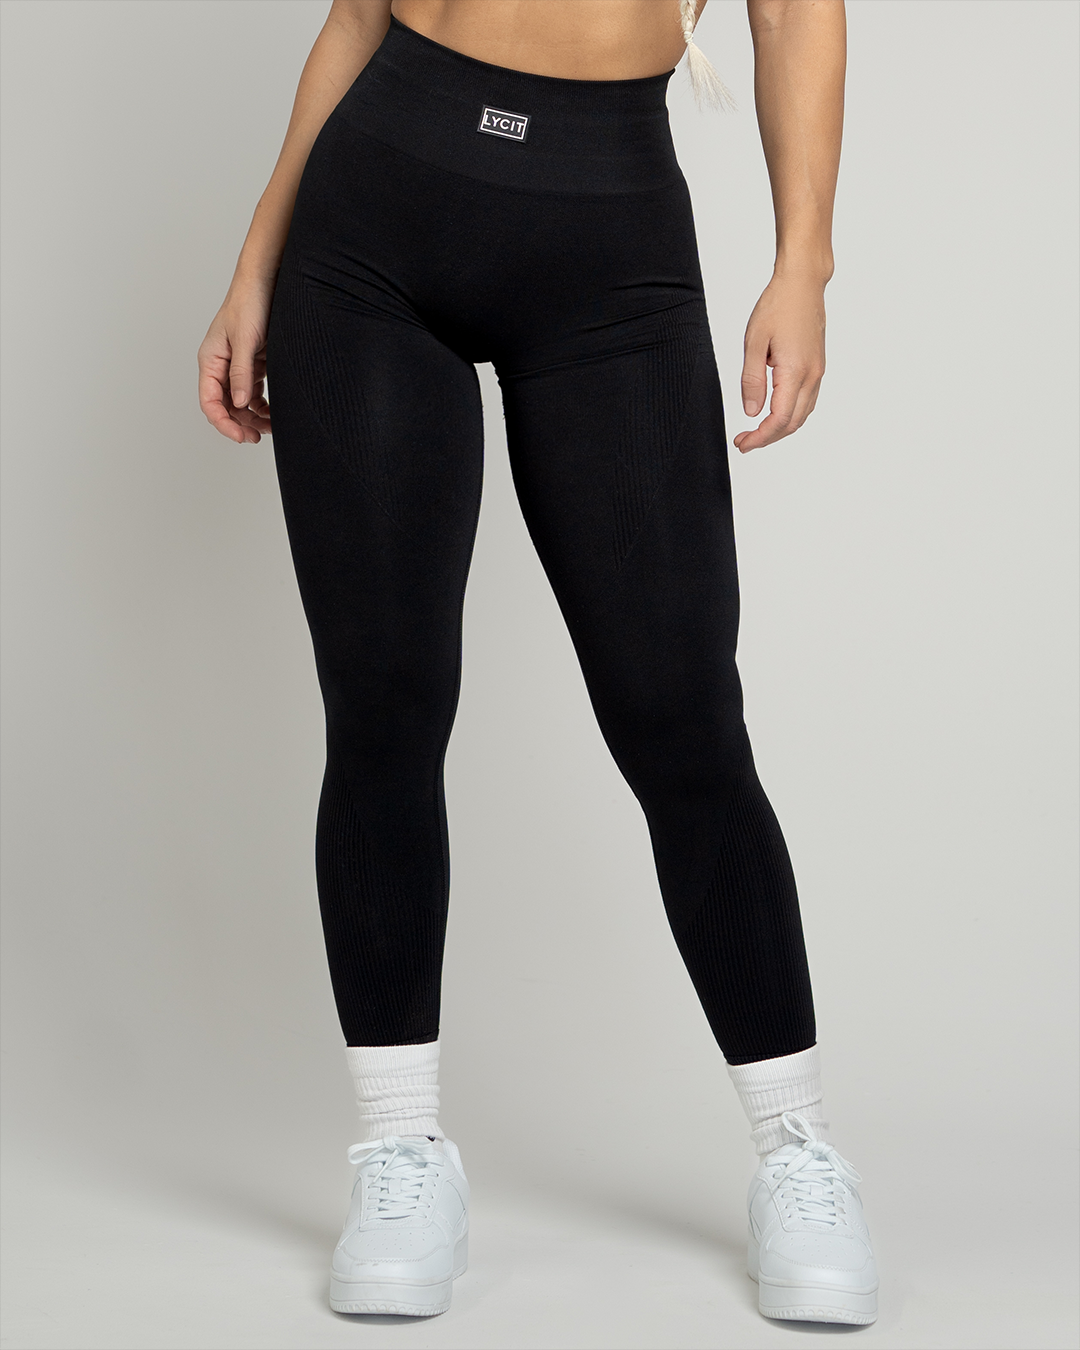 Set Active Luxform Leggings In Coco Size XS - $68 - From Nicole